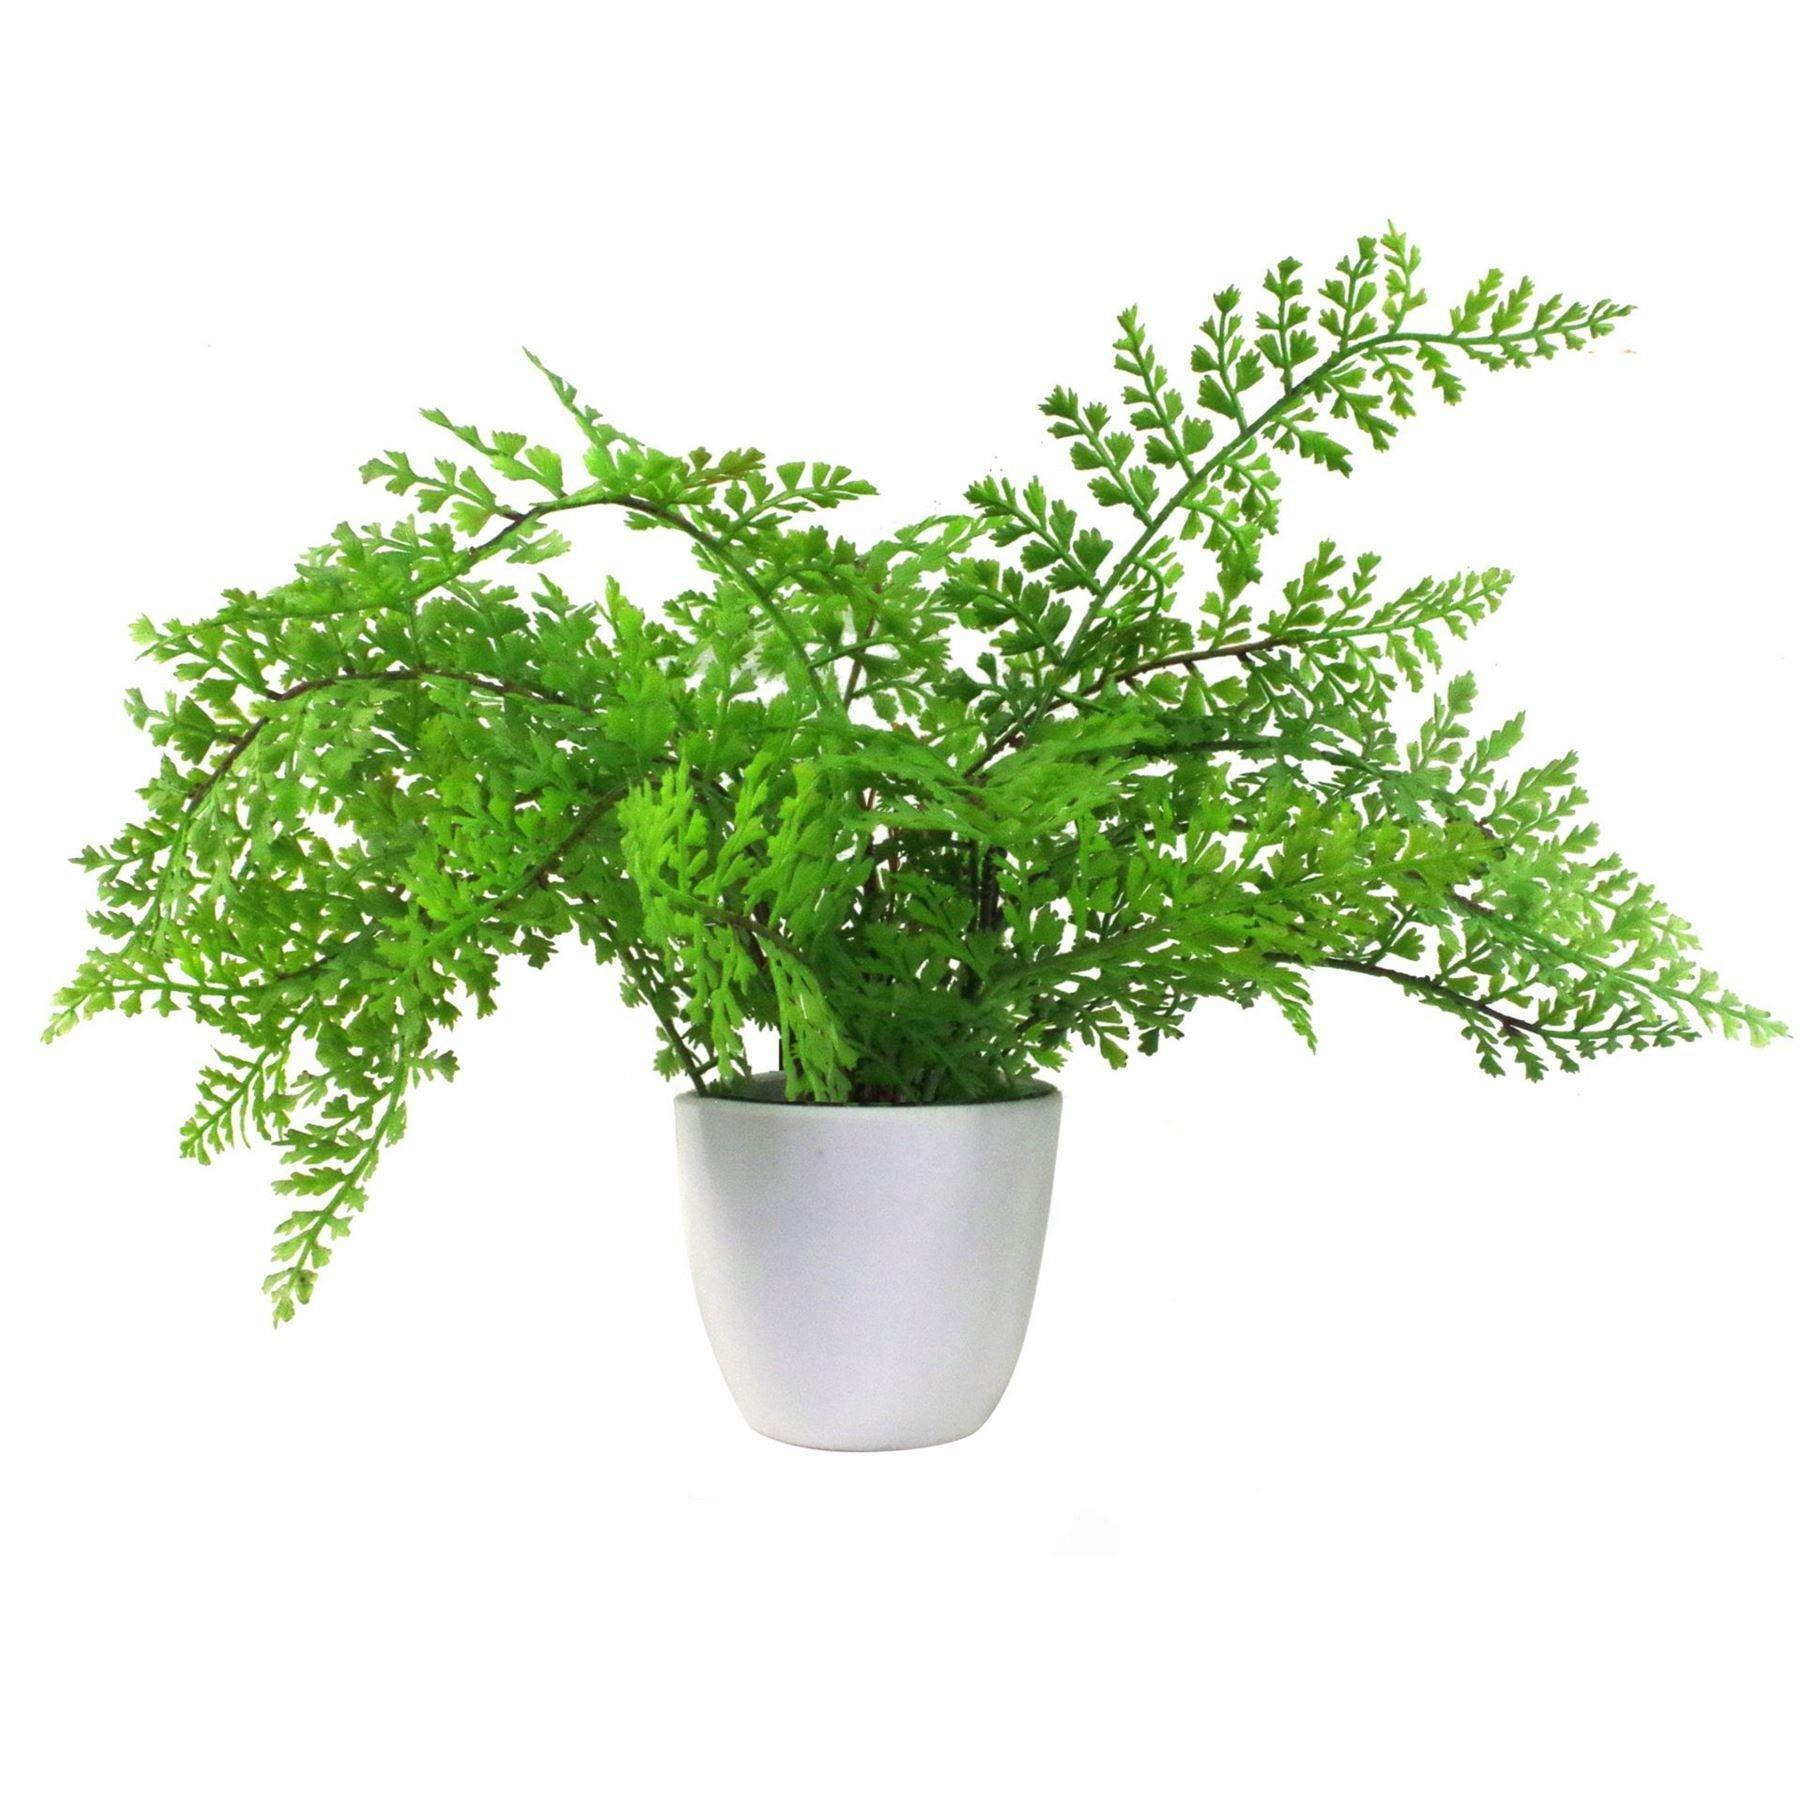 30cm Artificial Potted Royal Fern - image 1